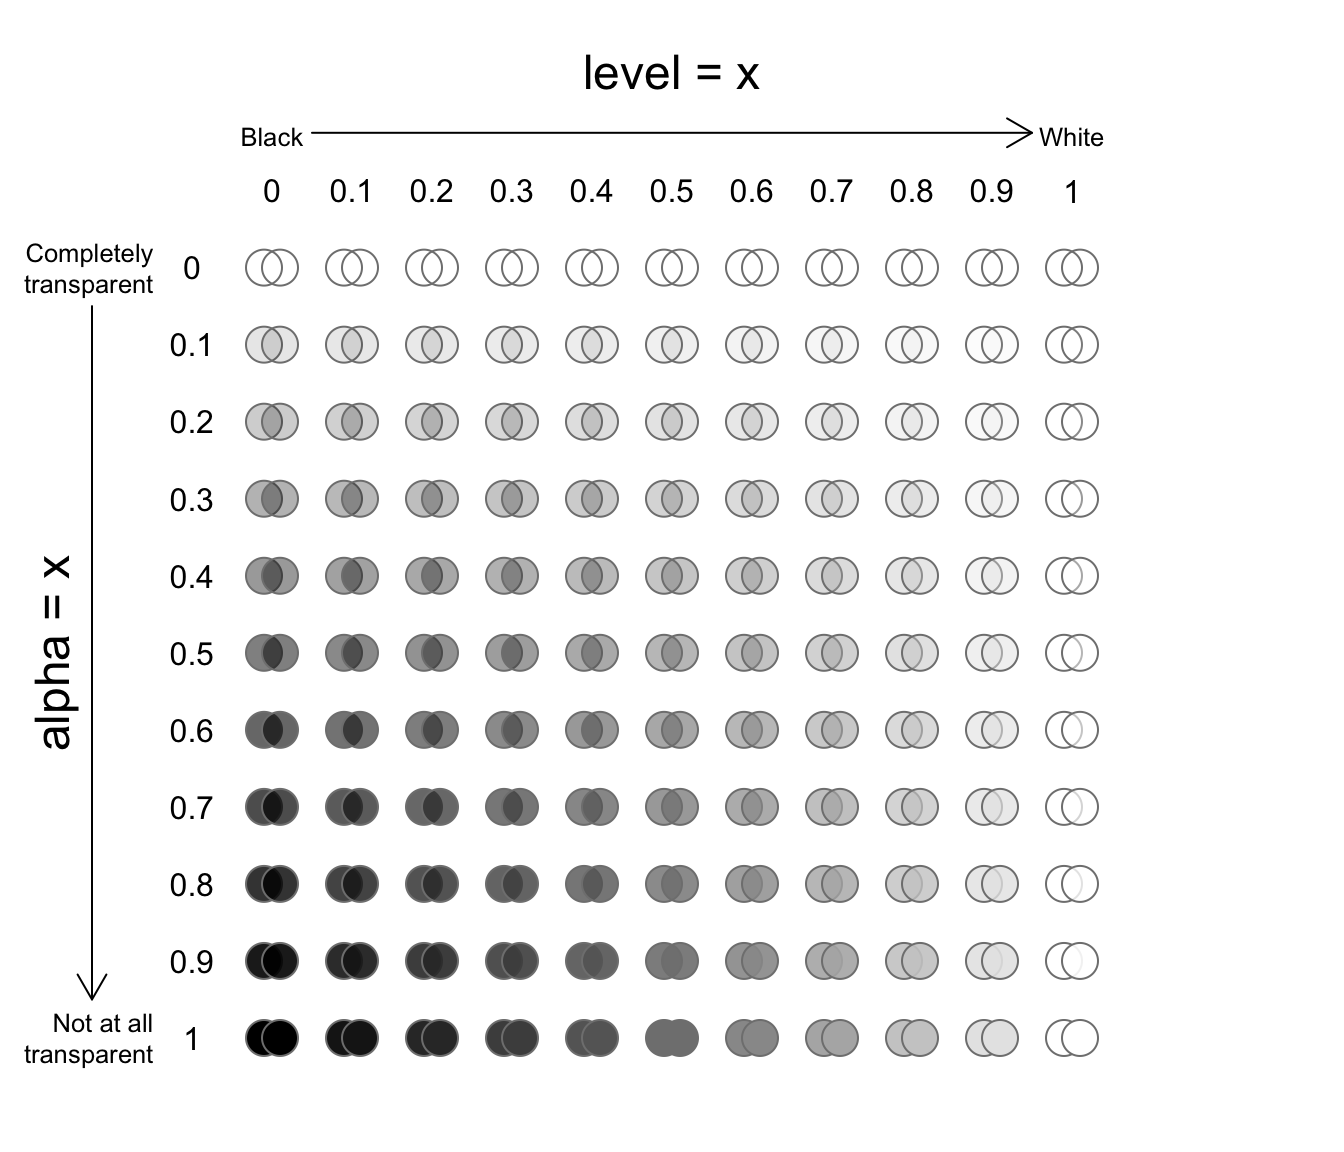 Examples of gray(level, alpha)